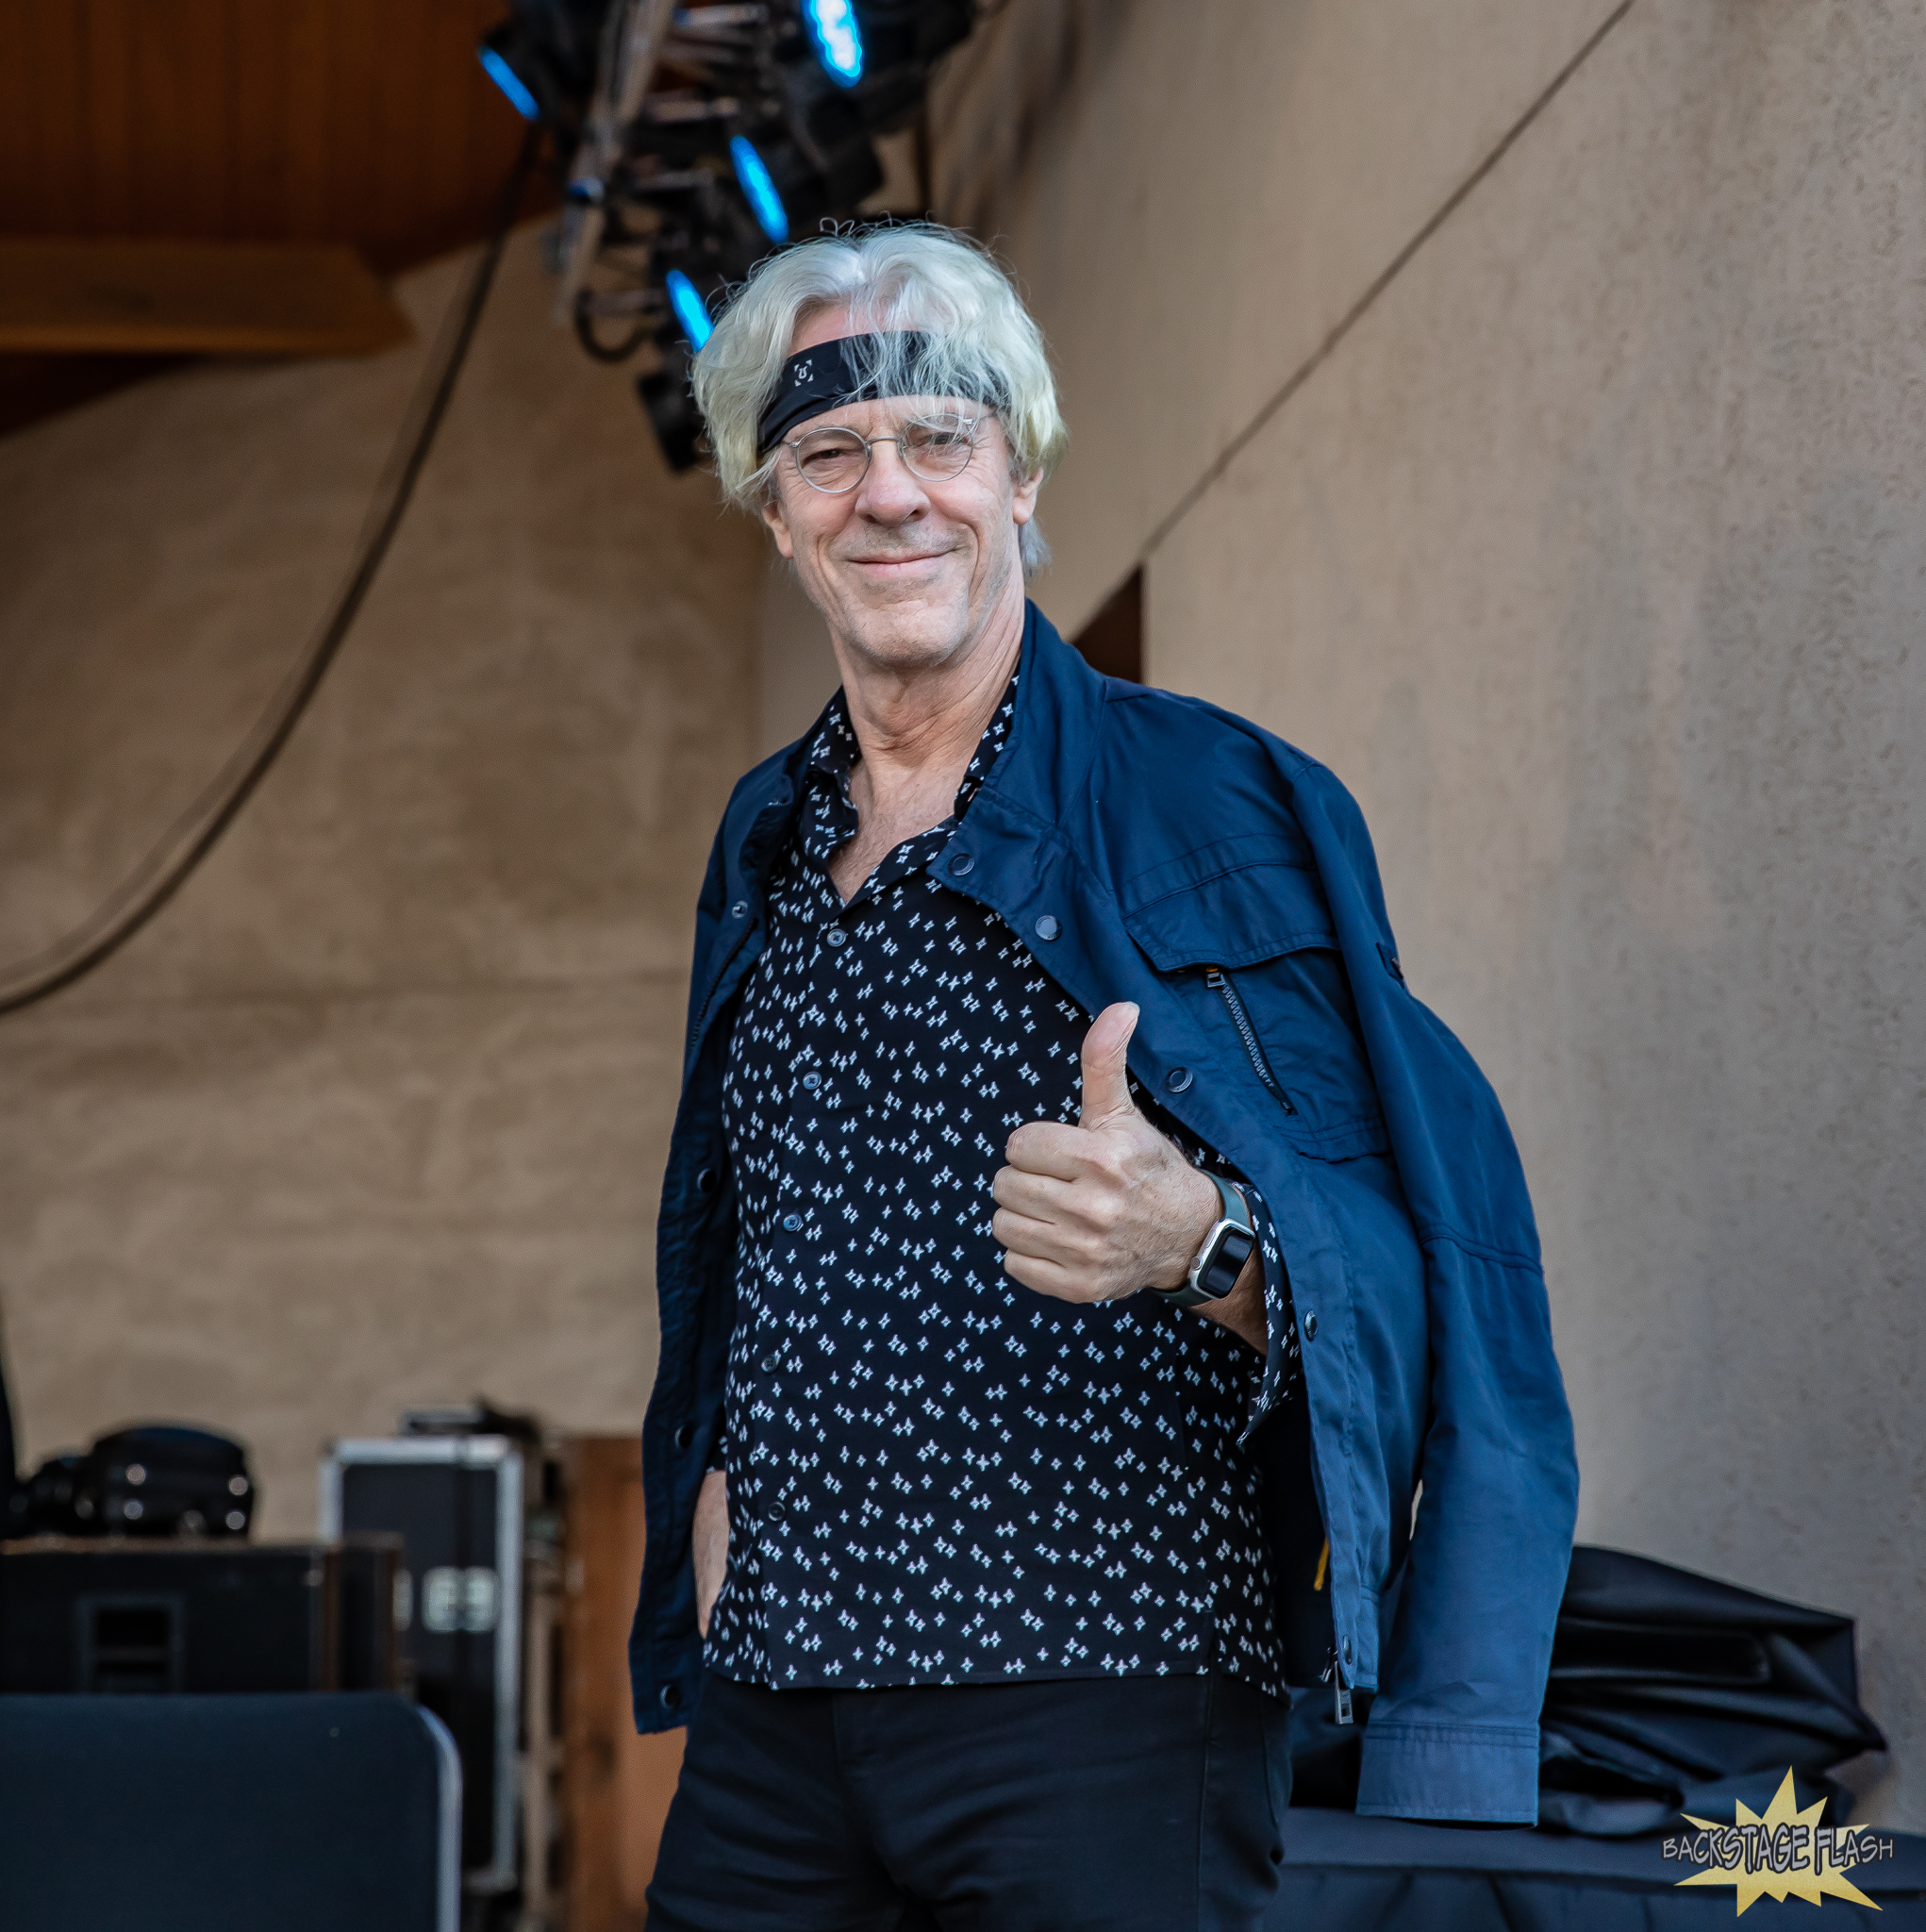 Stewart Copeland gives Backstage Flash a big thumbs up.